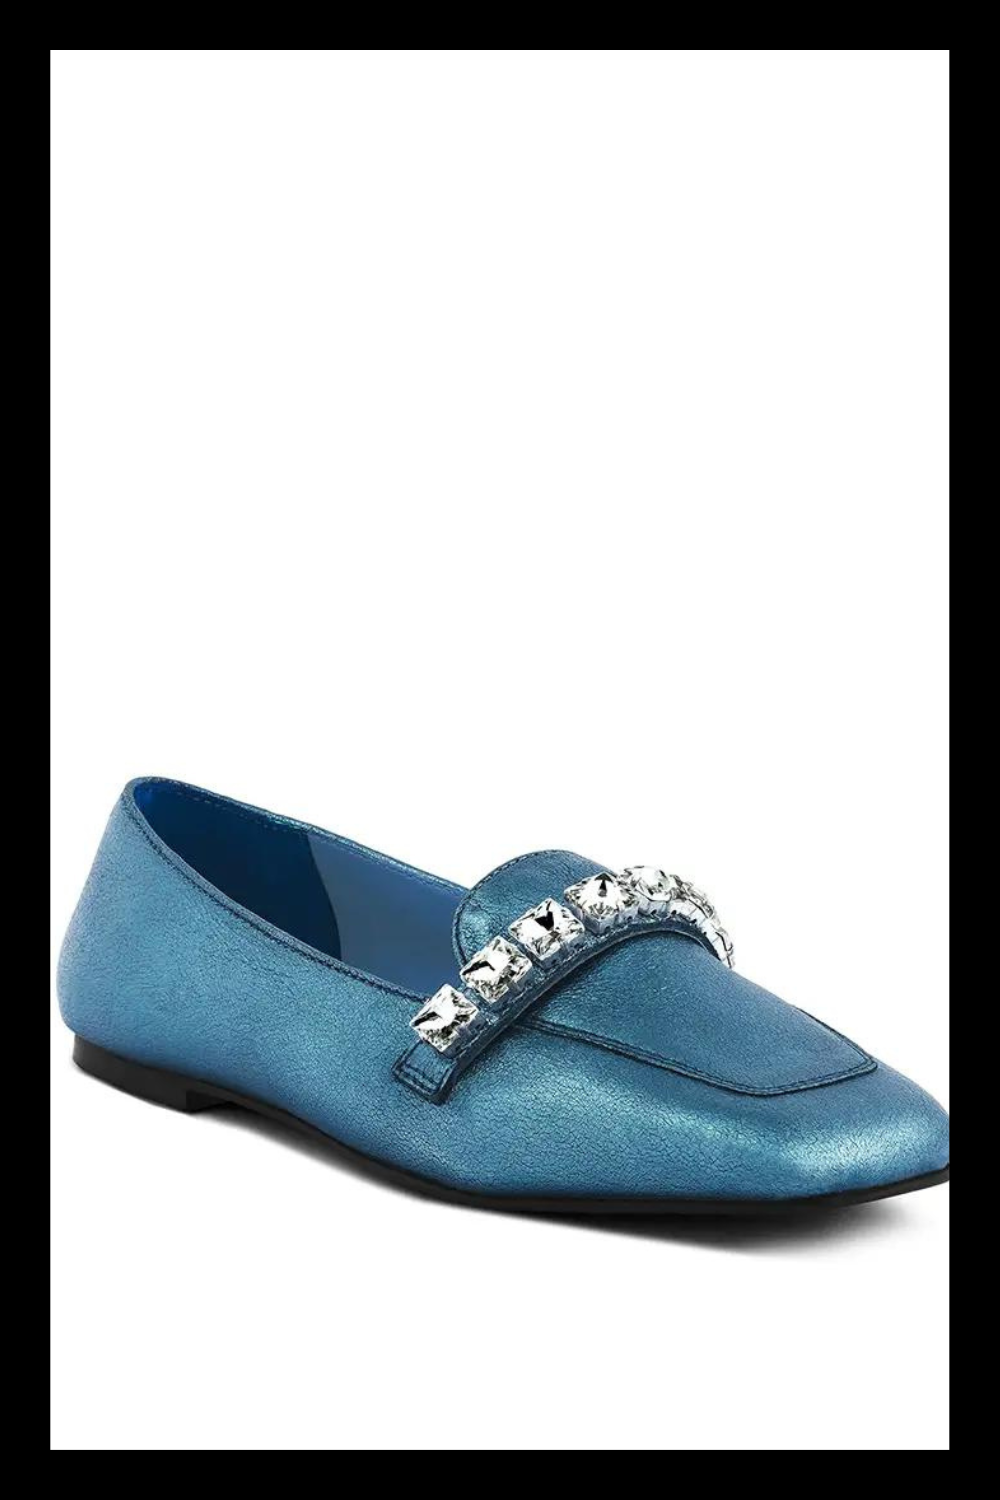 Women's Loafers | Metallic, Leather, and Stylish Colors | Coastal Bloom Boutique | Indialantic, FL